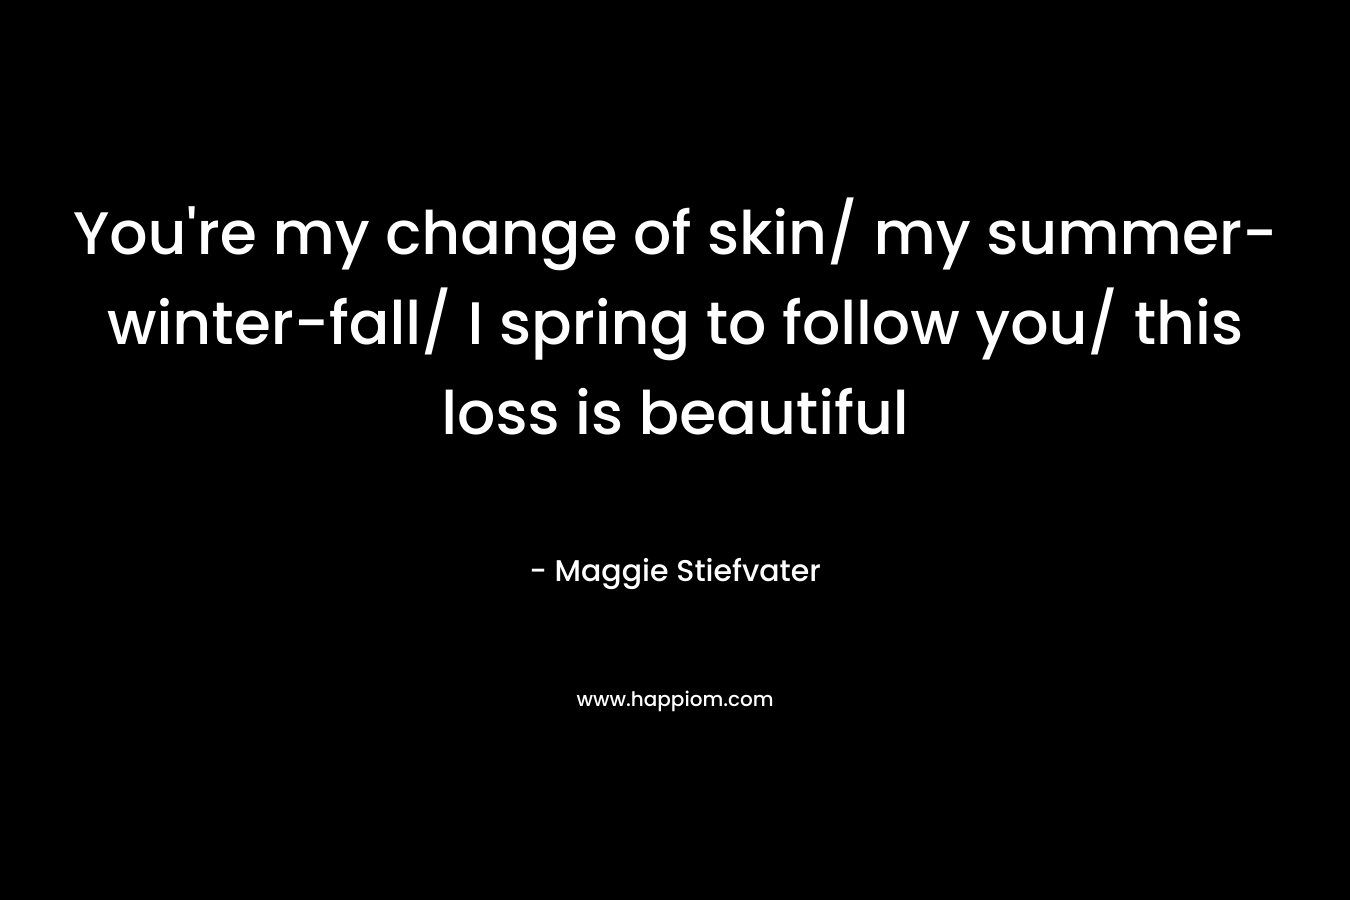 You’re my change of skin/ my summer-winter-fall/ I spring to follow you/ this loss is beautiful – Maggie Stiefvater